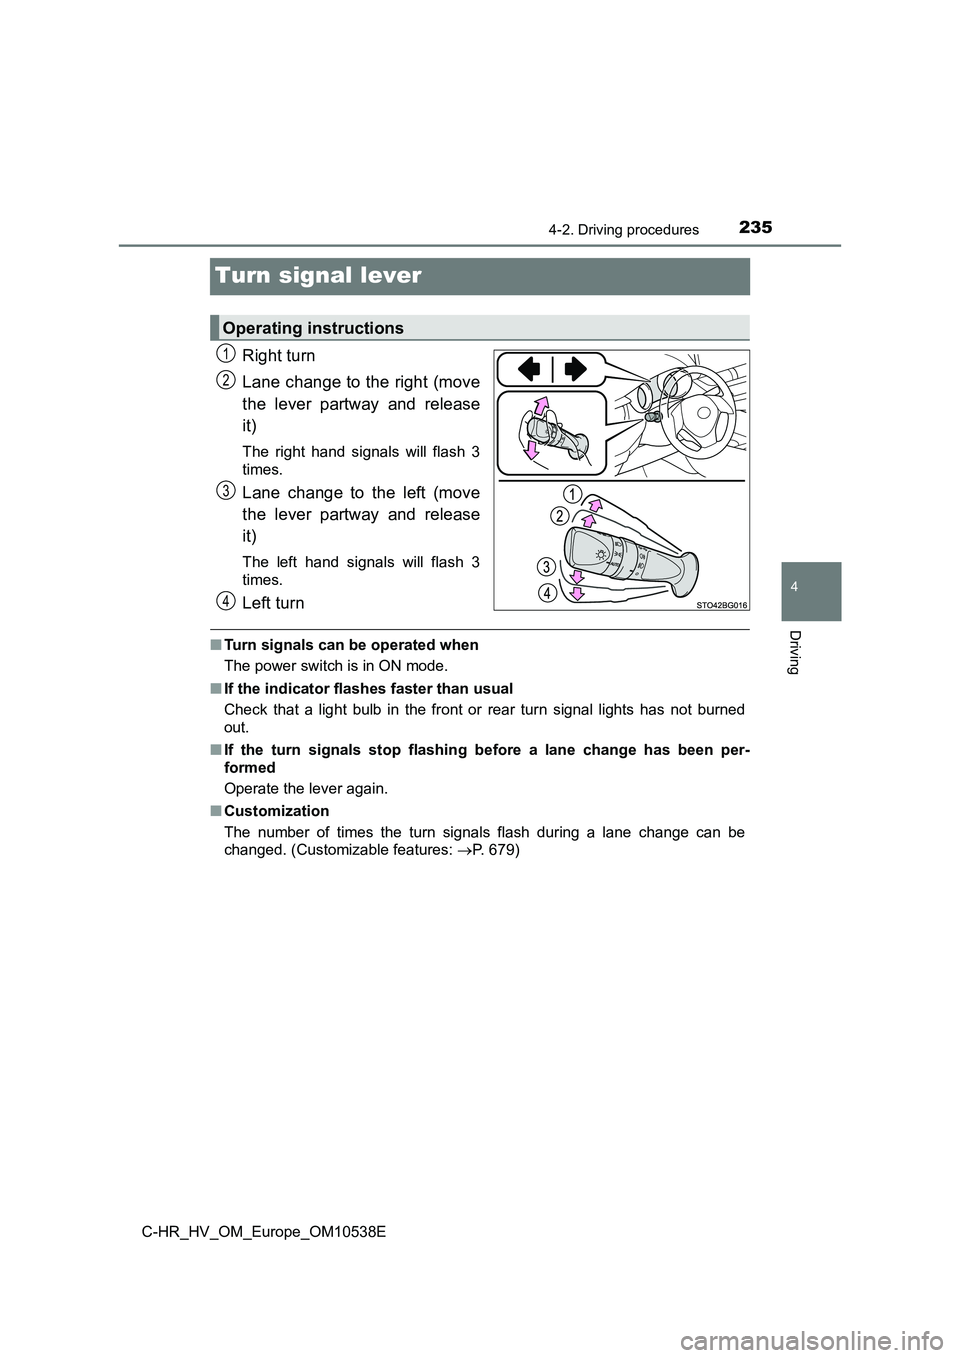 TOYOTA C_HR HYBRID 2016 Owners Manual 235
4
4-2. Driving procedures
Driving
C-HR_HV_OM_Europe_OM10538E
Turn signal lever
Right turn 
Lane change to the right (move 
the lever partway and release 
it)
The right hand signals will flash 3 
t